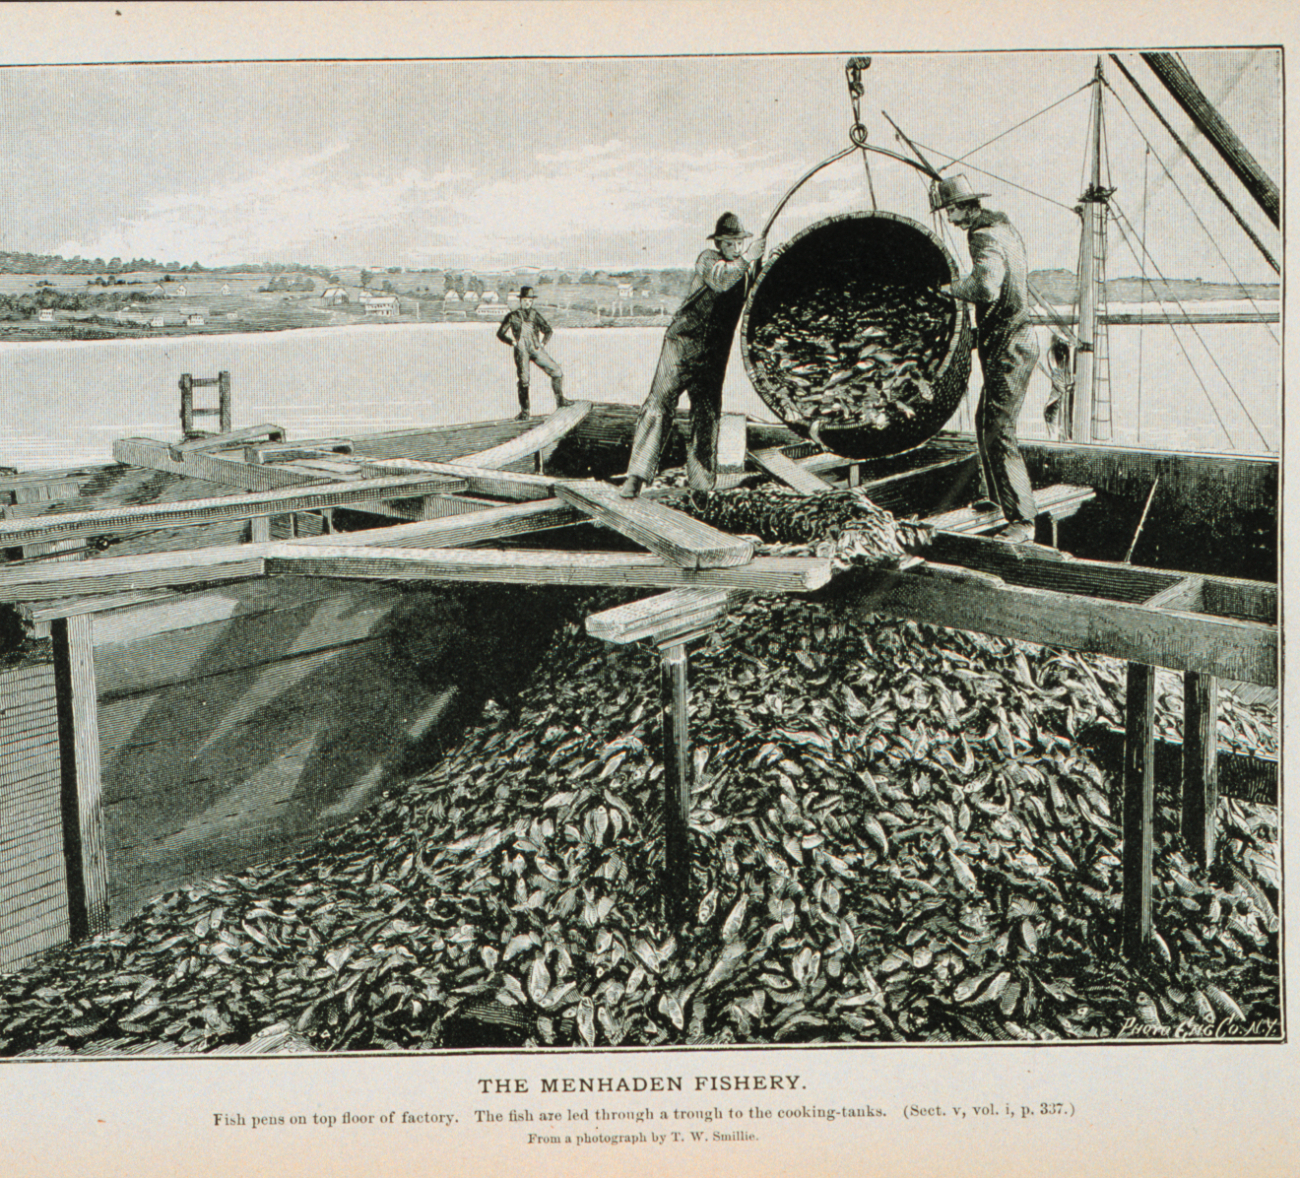 Fish pens on top floor of menhaden factoryThe fish are led through a trough to the cooking tanksFrom a photograph by T